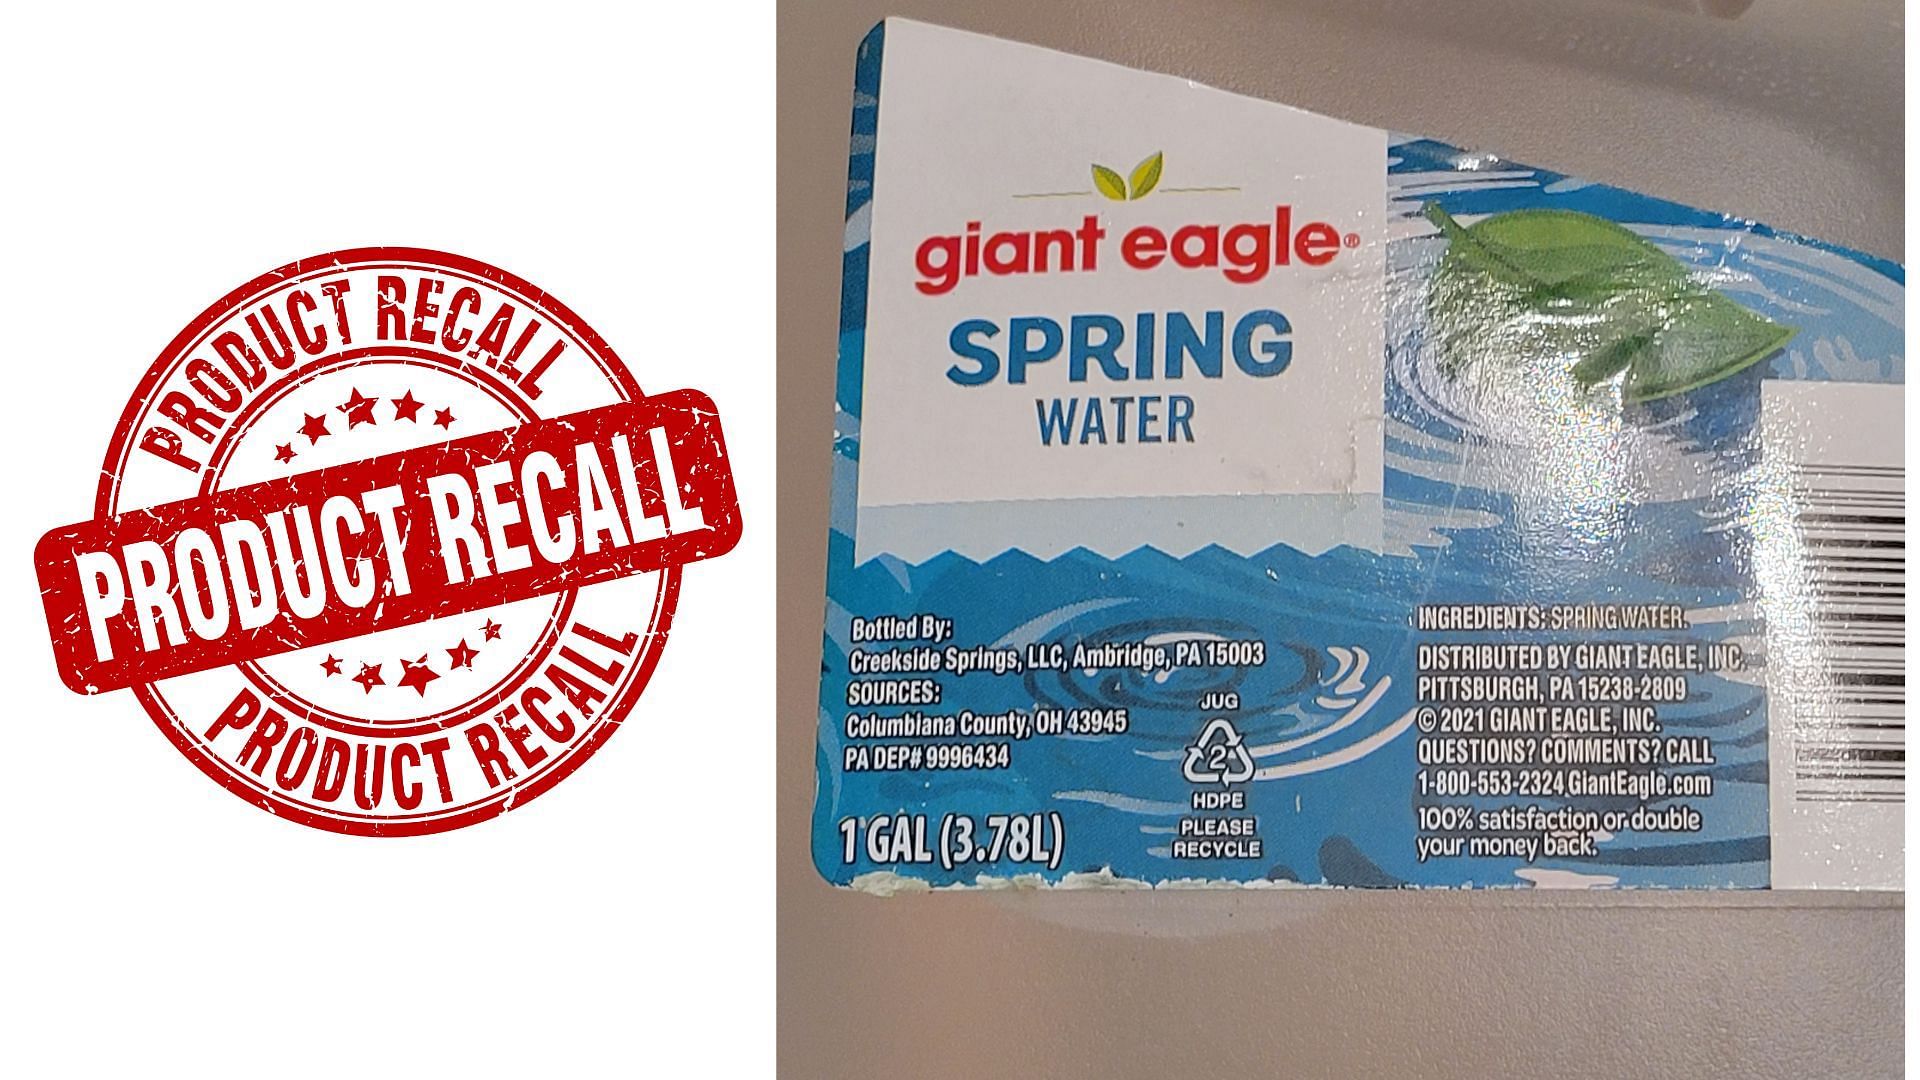 The Giant Eagle grocery store chain discontinues sales of all gallon-size-or-greater spring water products sourced from the Salineville facility following the East Palestine Train Derailment (Image via Giant Eagle)